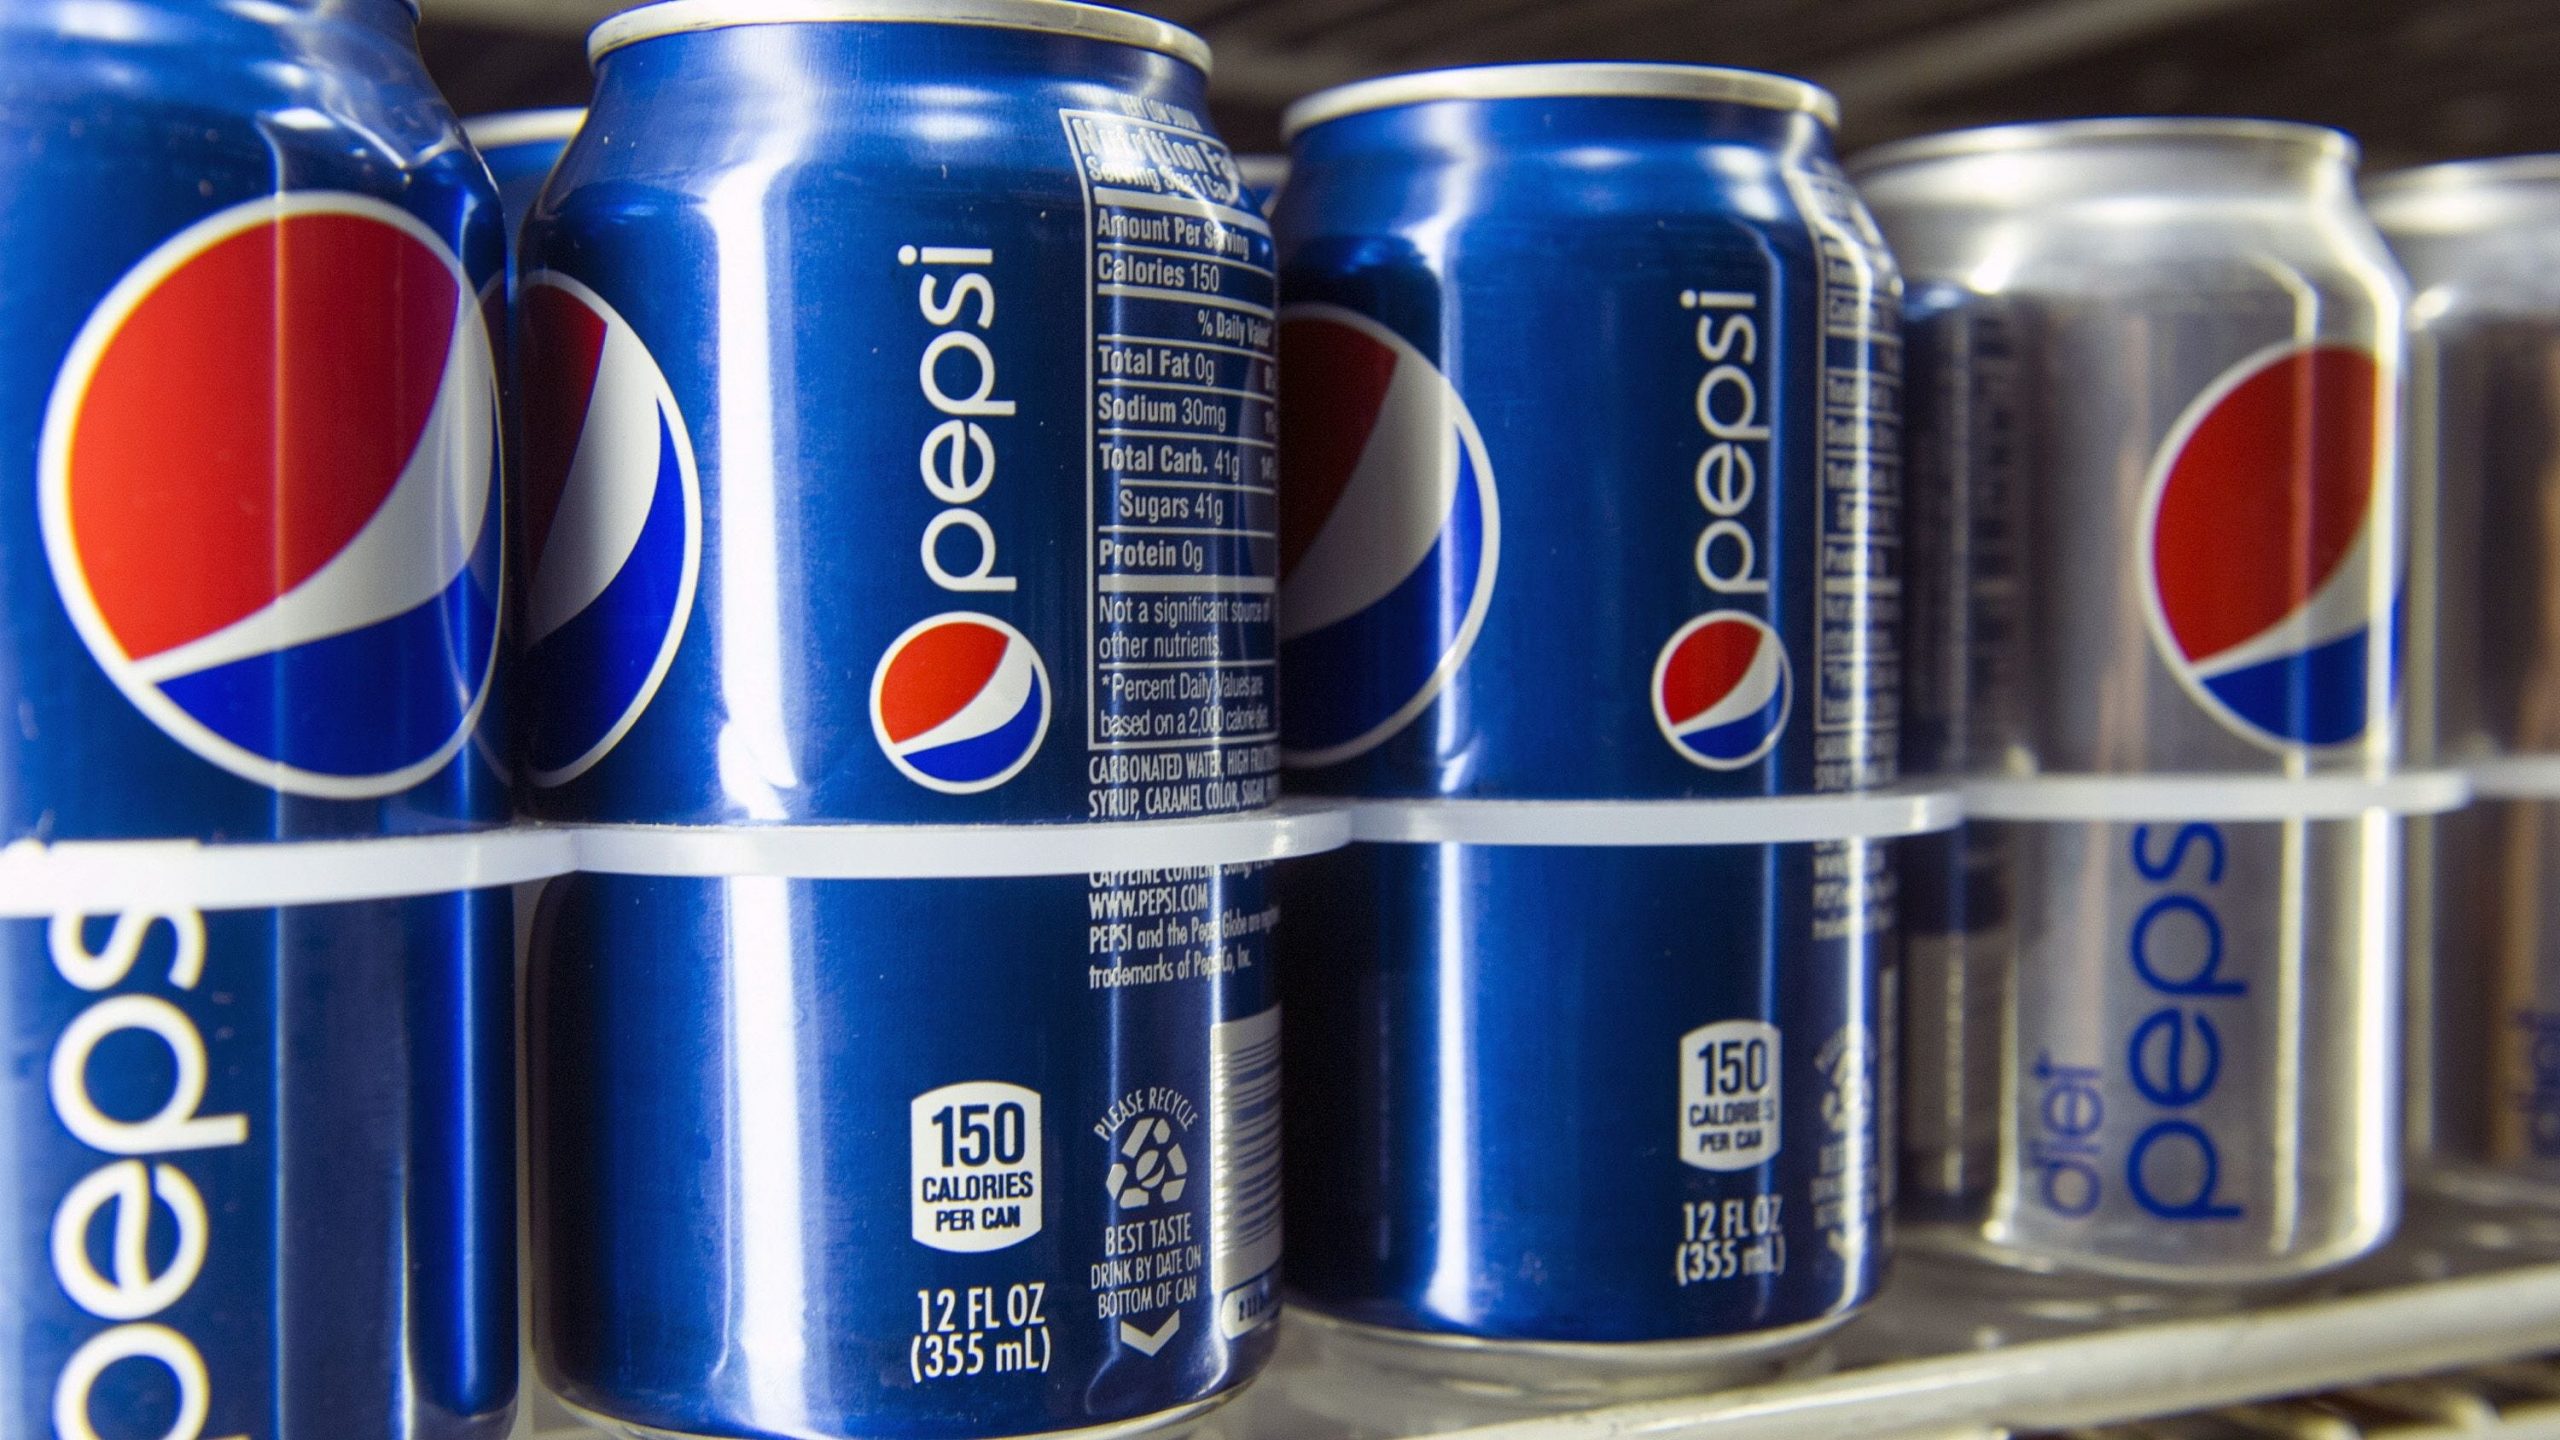 Fact Check: Allegations That Pepsico Donated To Antifa Are False photo